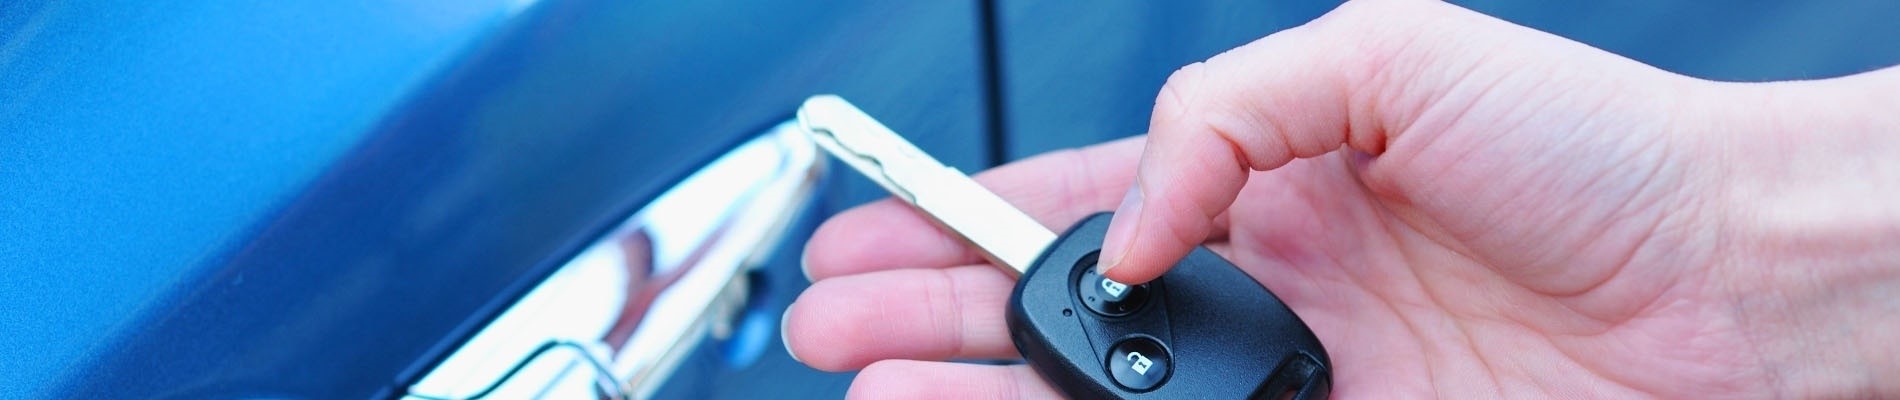 We specialize in replacement car keys, key programming and duplicate car keys